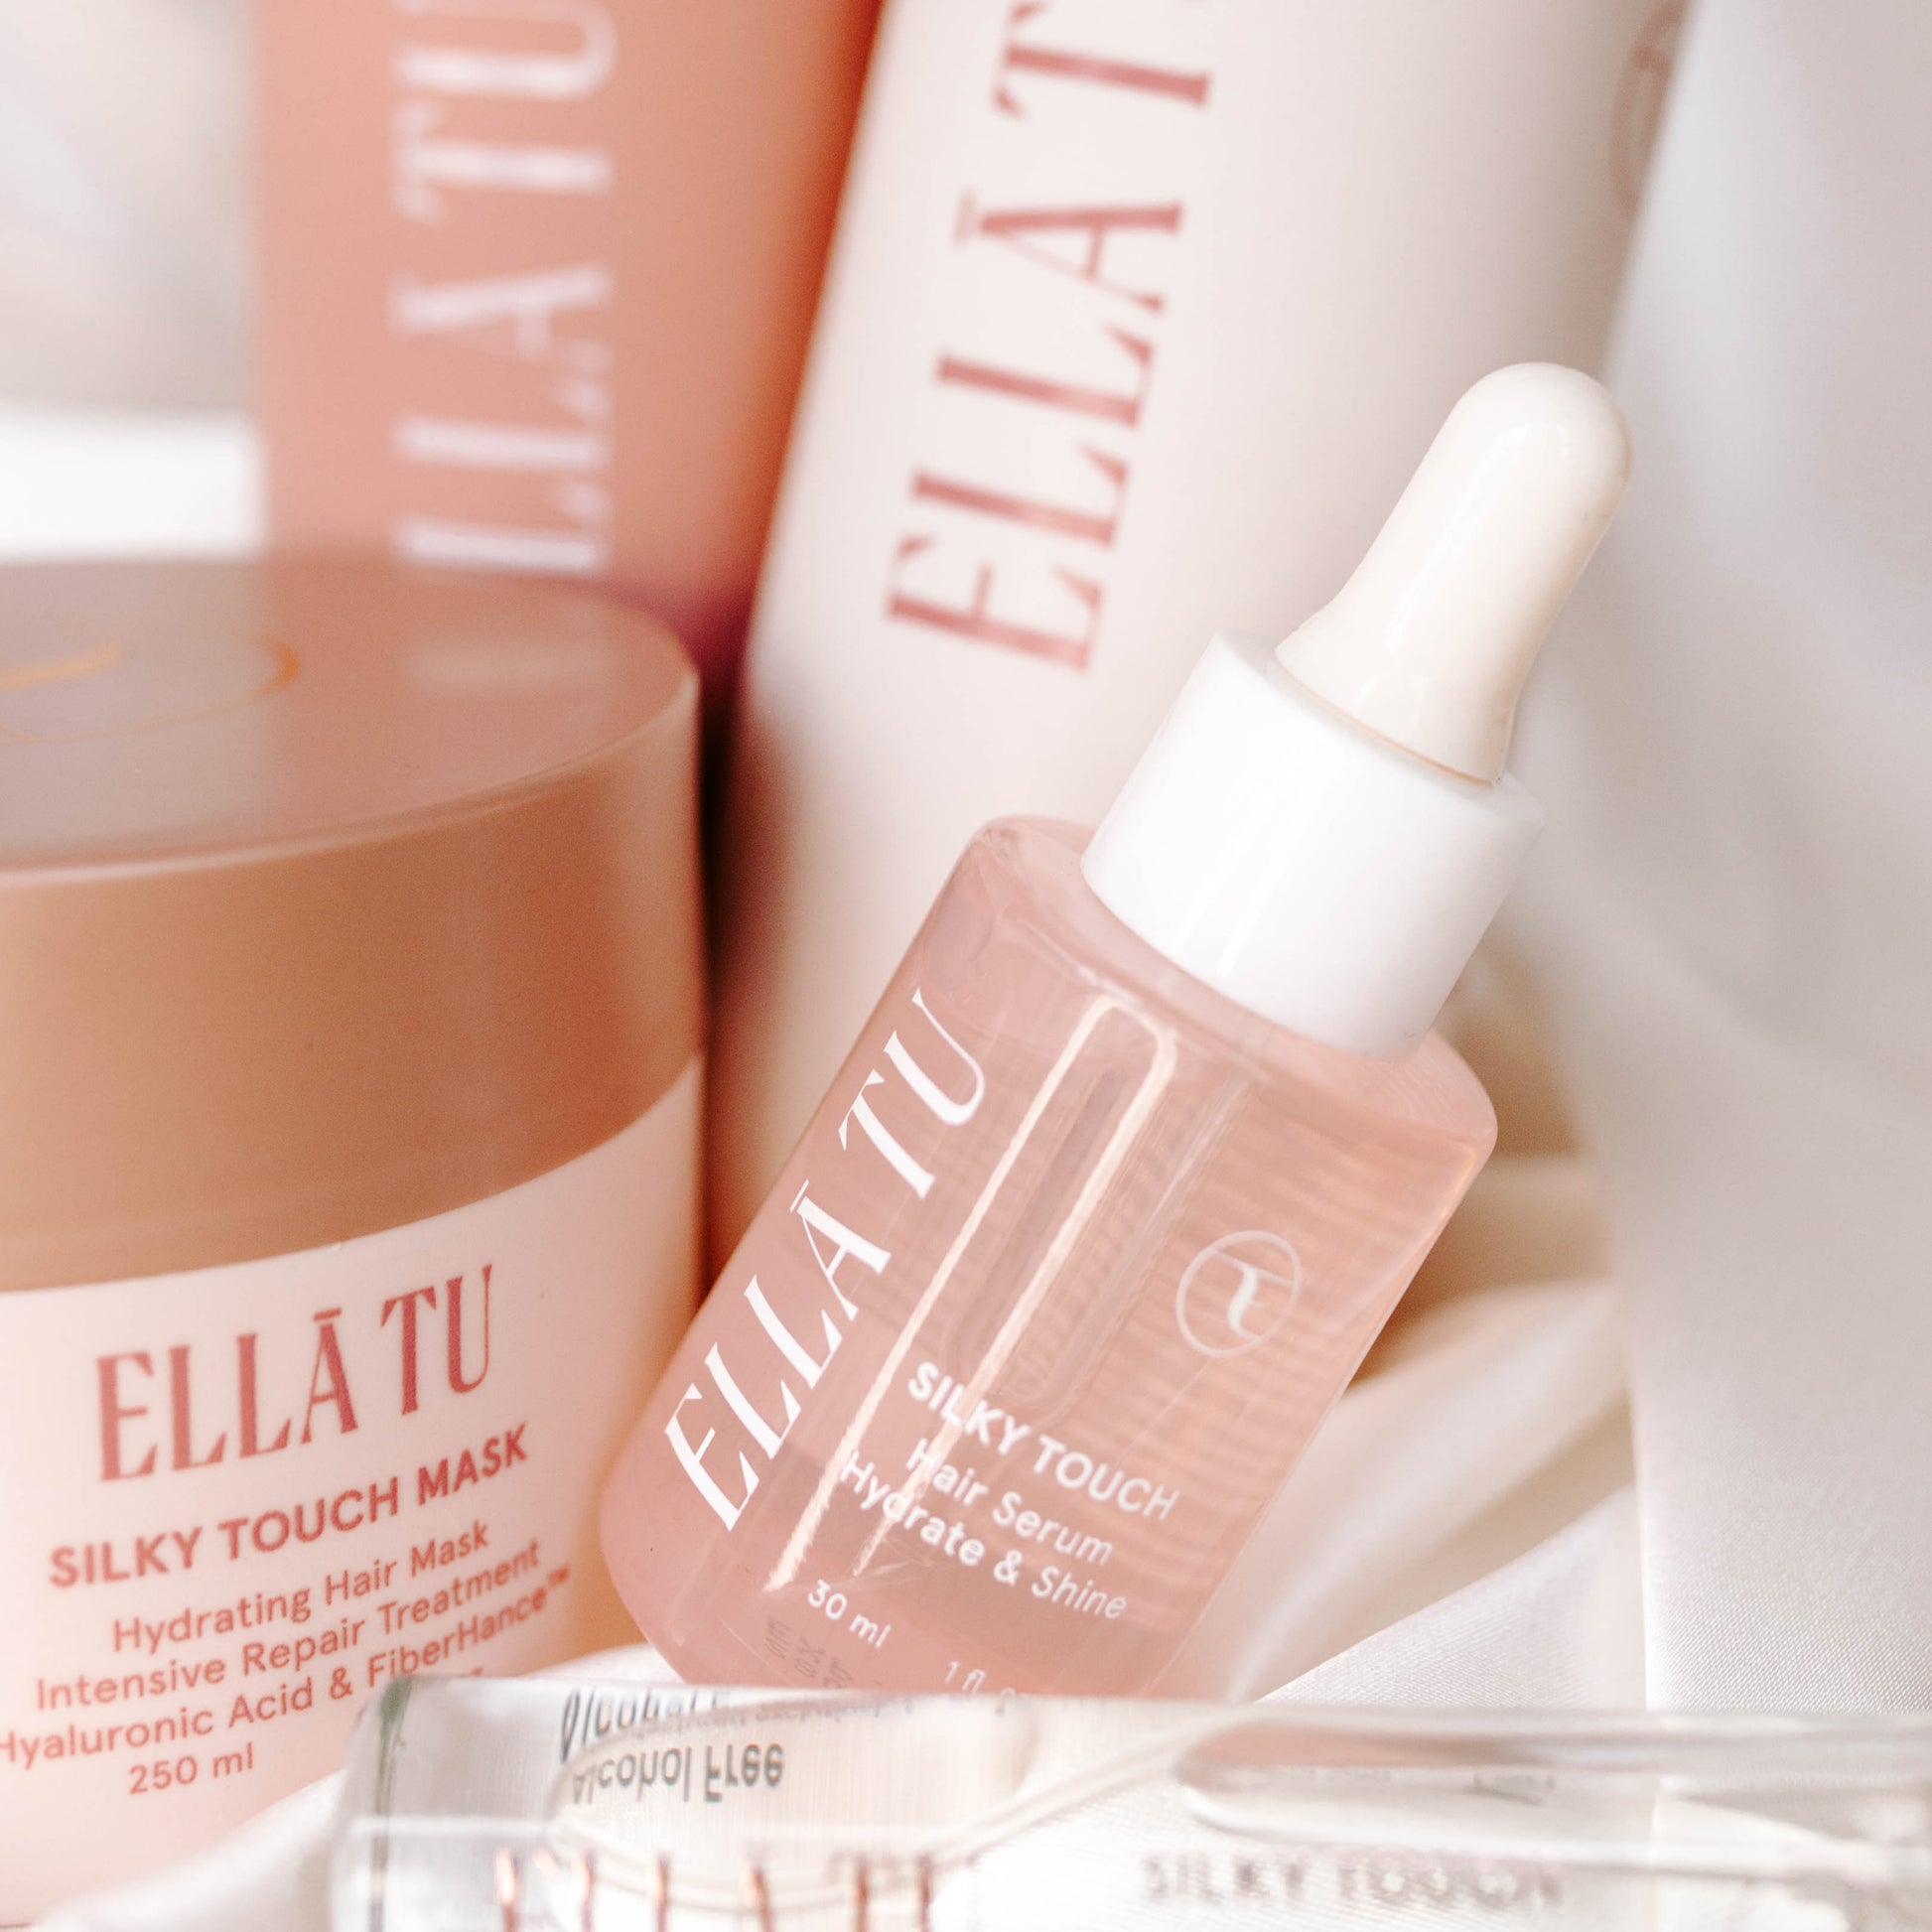 The complete Ellatu Goddess Hair Care kit has everything you need to combat damaged, frizzy and dry hair. Our shampoo, conditioner, mask, serum and fragrance / perfume, not only helps you on your journey to healthier more radiant hair, but also leaves you with the mesmerizing aroma of bergamot, amber and sandalwood